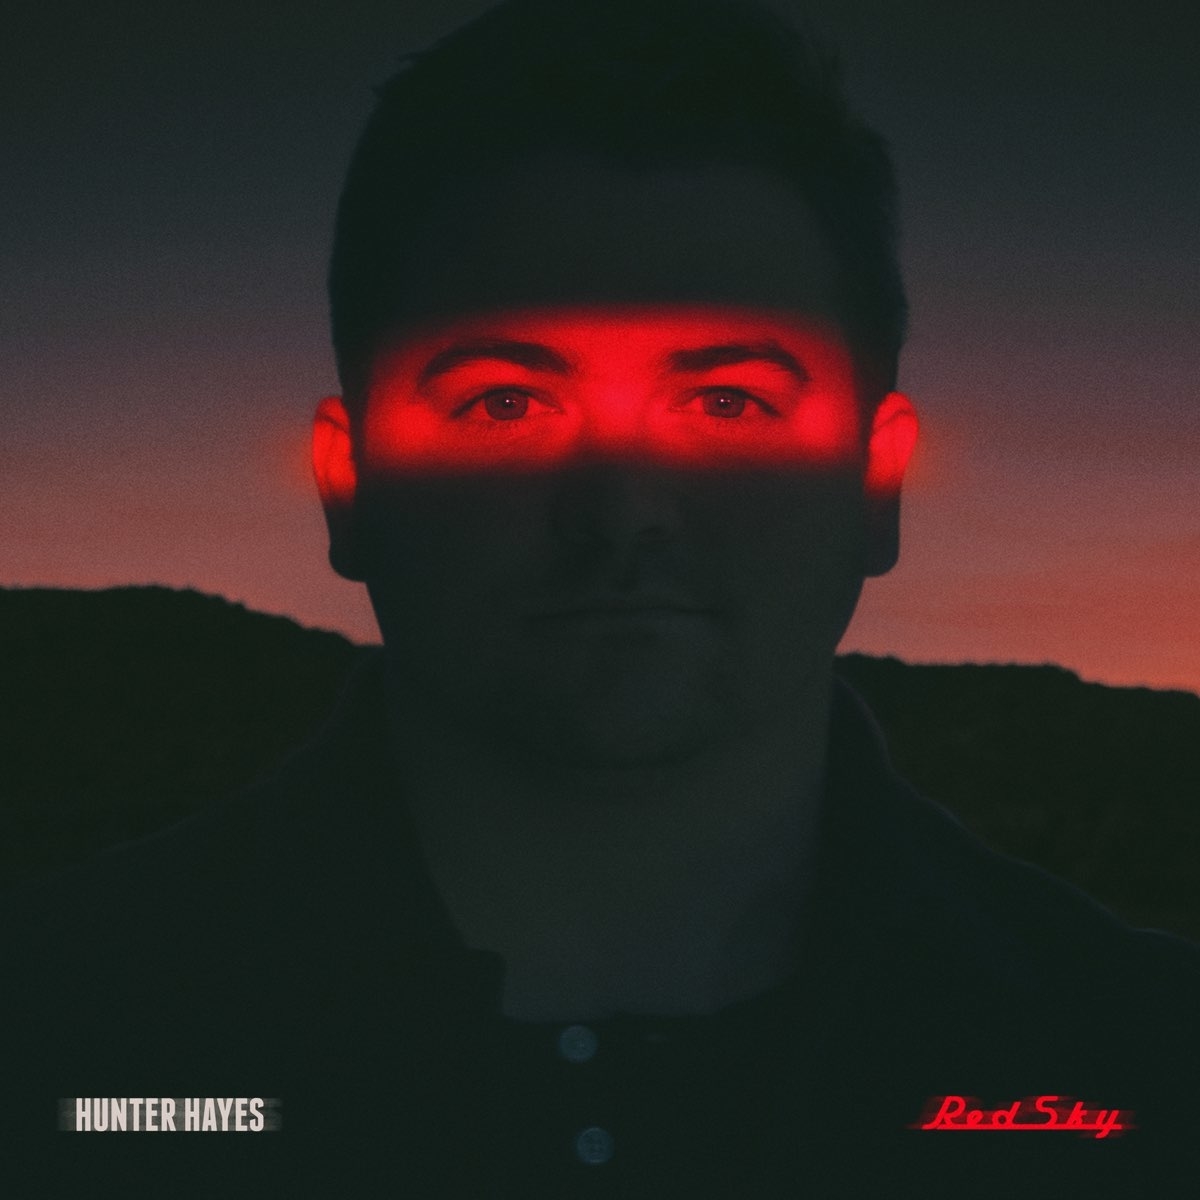 Album cover for Red Sky by Hunter Hayes, showing Hunter&#x27;s eyes illuminated in red